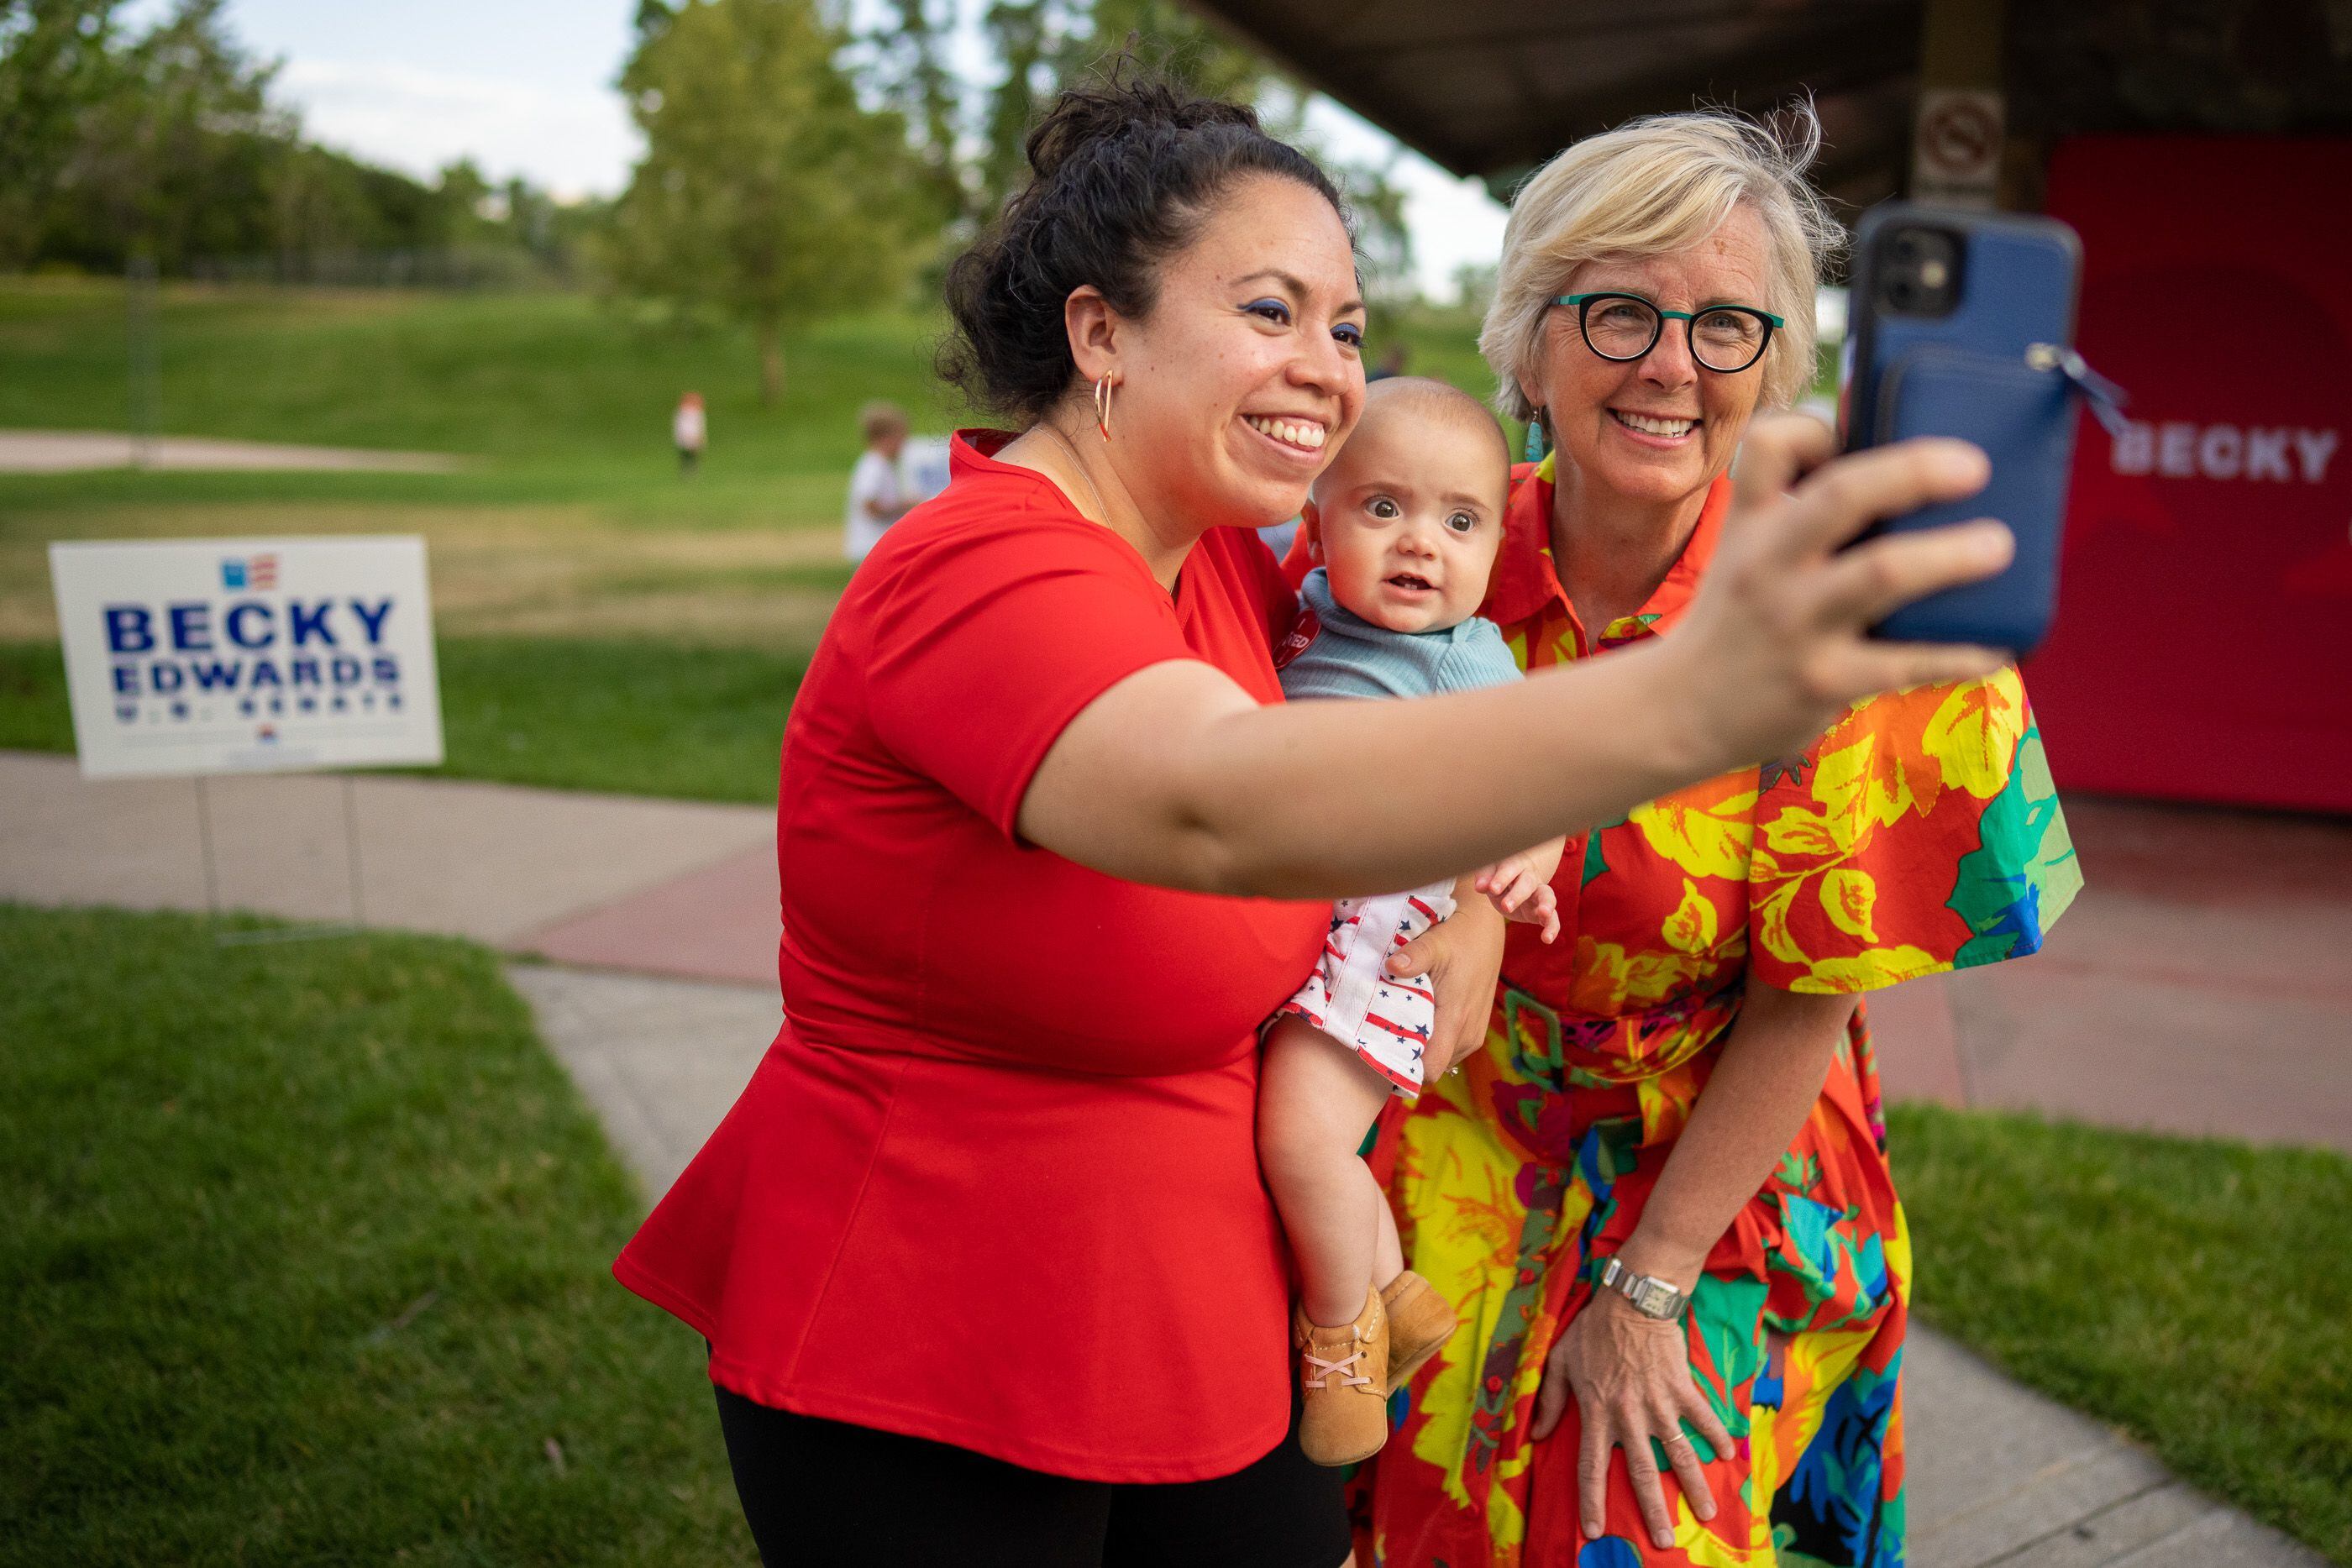 (Trent Nelson  |  The Salt Lake Tribune) Republican U.S. Senate candidate Becky Edwards poses for a photo at her primary election night party in Salt Lake City's Sugar House Park on Tuesday, June 28, 2022. From left are Yándary Chatwin, Clyde Chatwin, and Edwards.